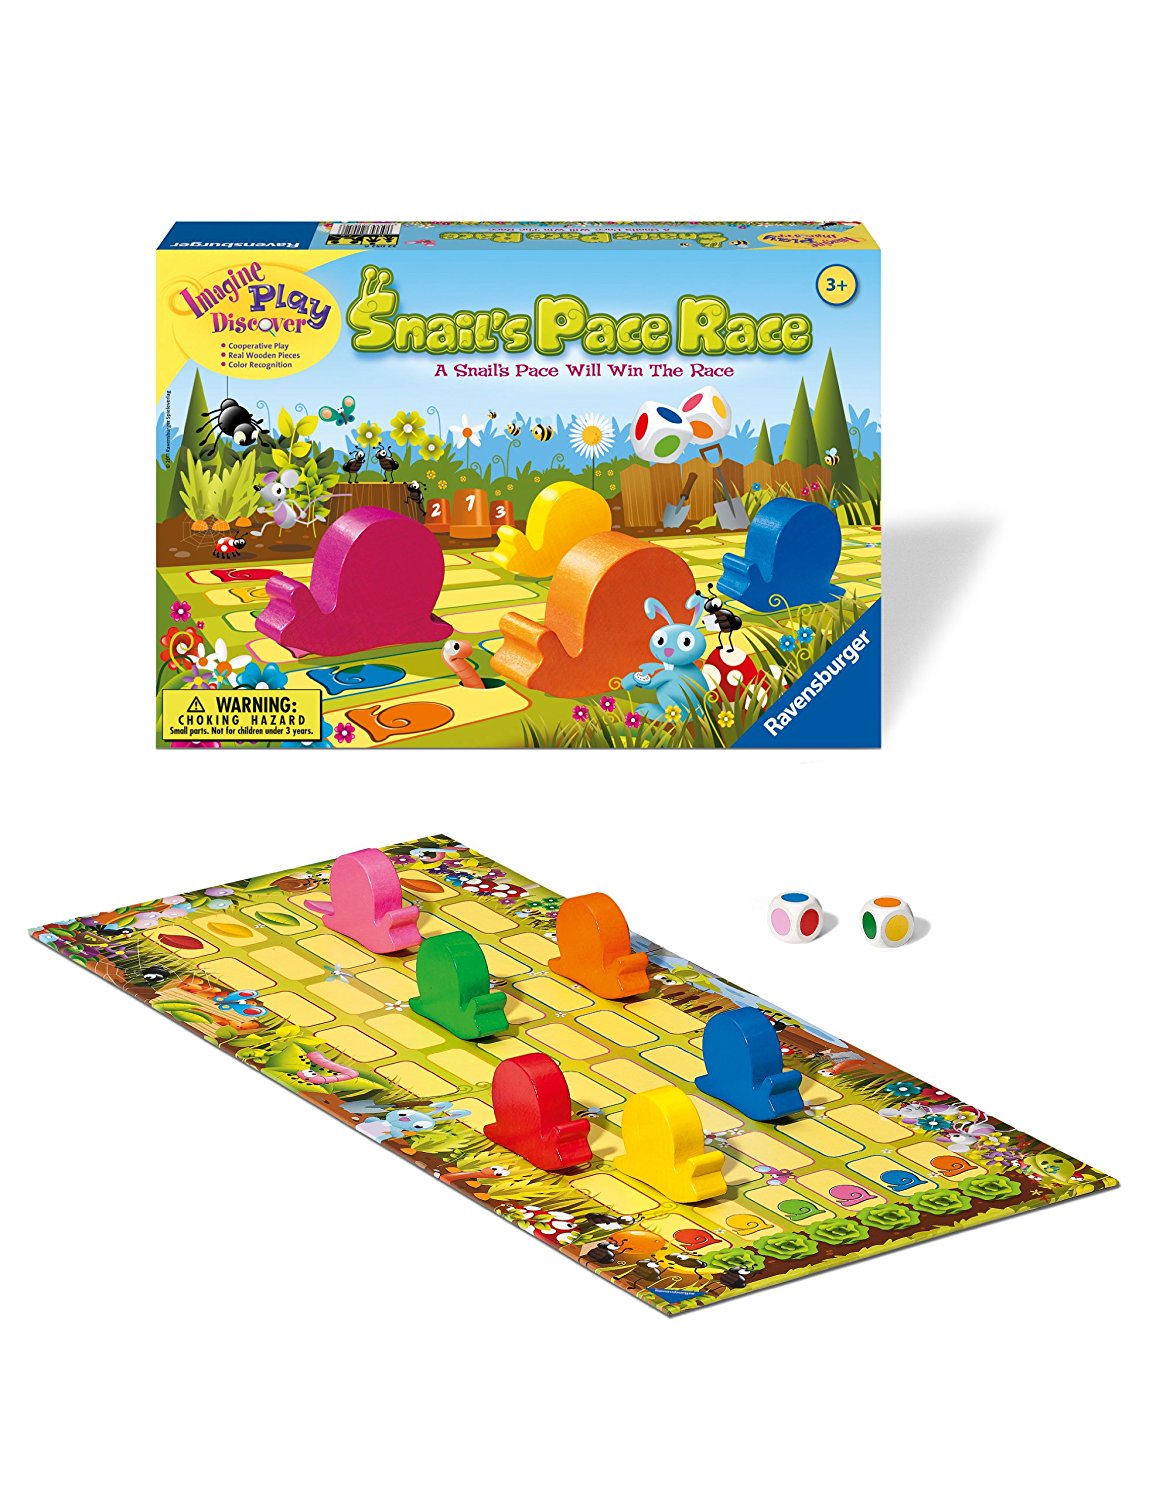 games for 2 and 3 year olds